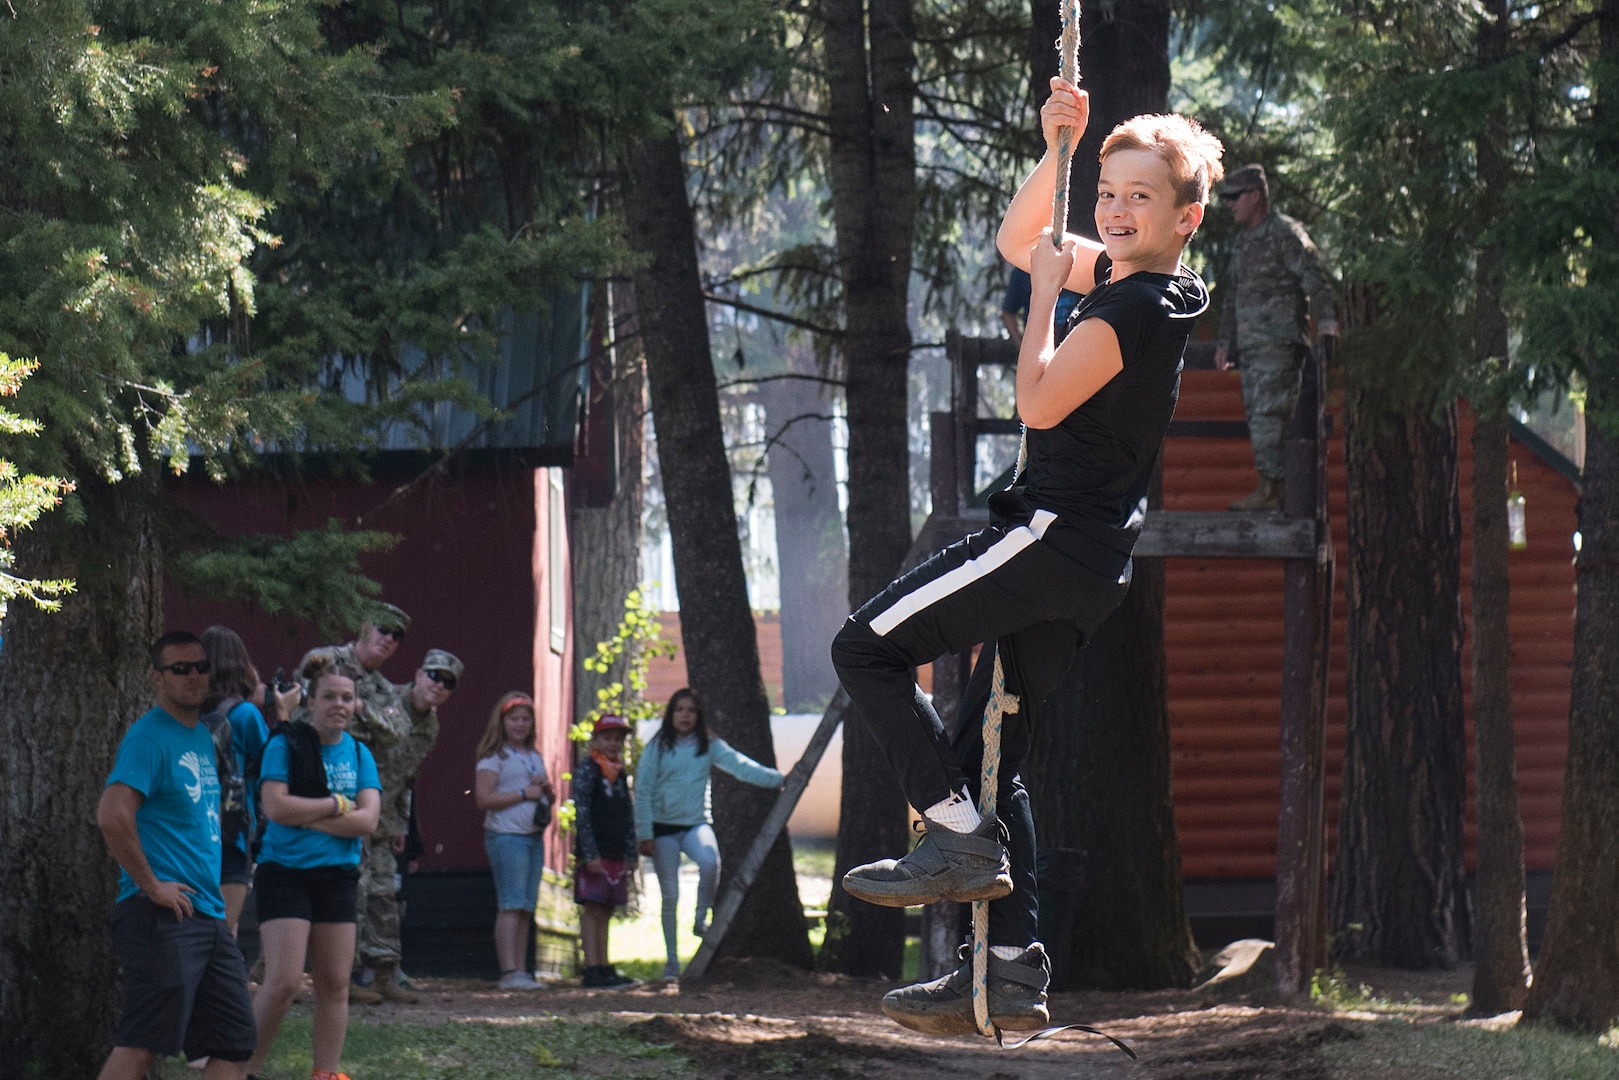 Children of Idaho Army and Air National Guard members not only survived the “Survivor”-themed summer camp, they thrived. The event-filled camp was held Aug 12-16, 2019, and was designed to build resiliency and strength in youth of military families.